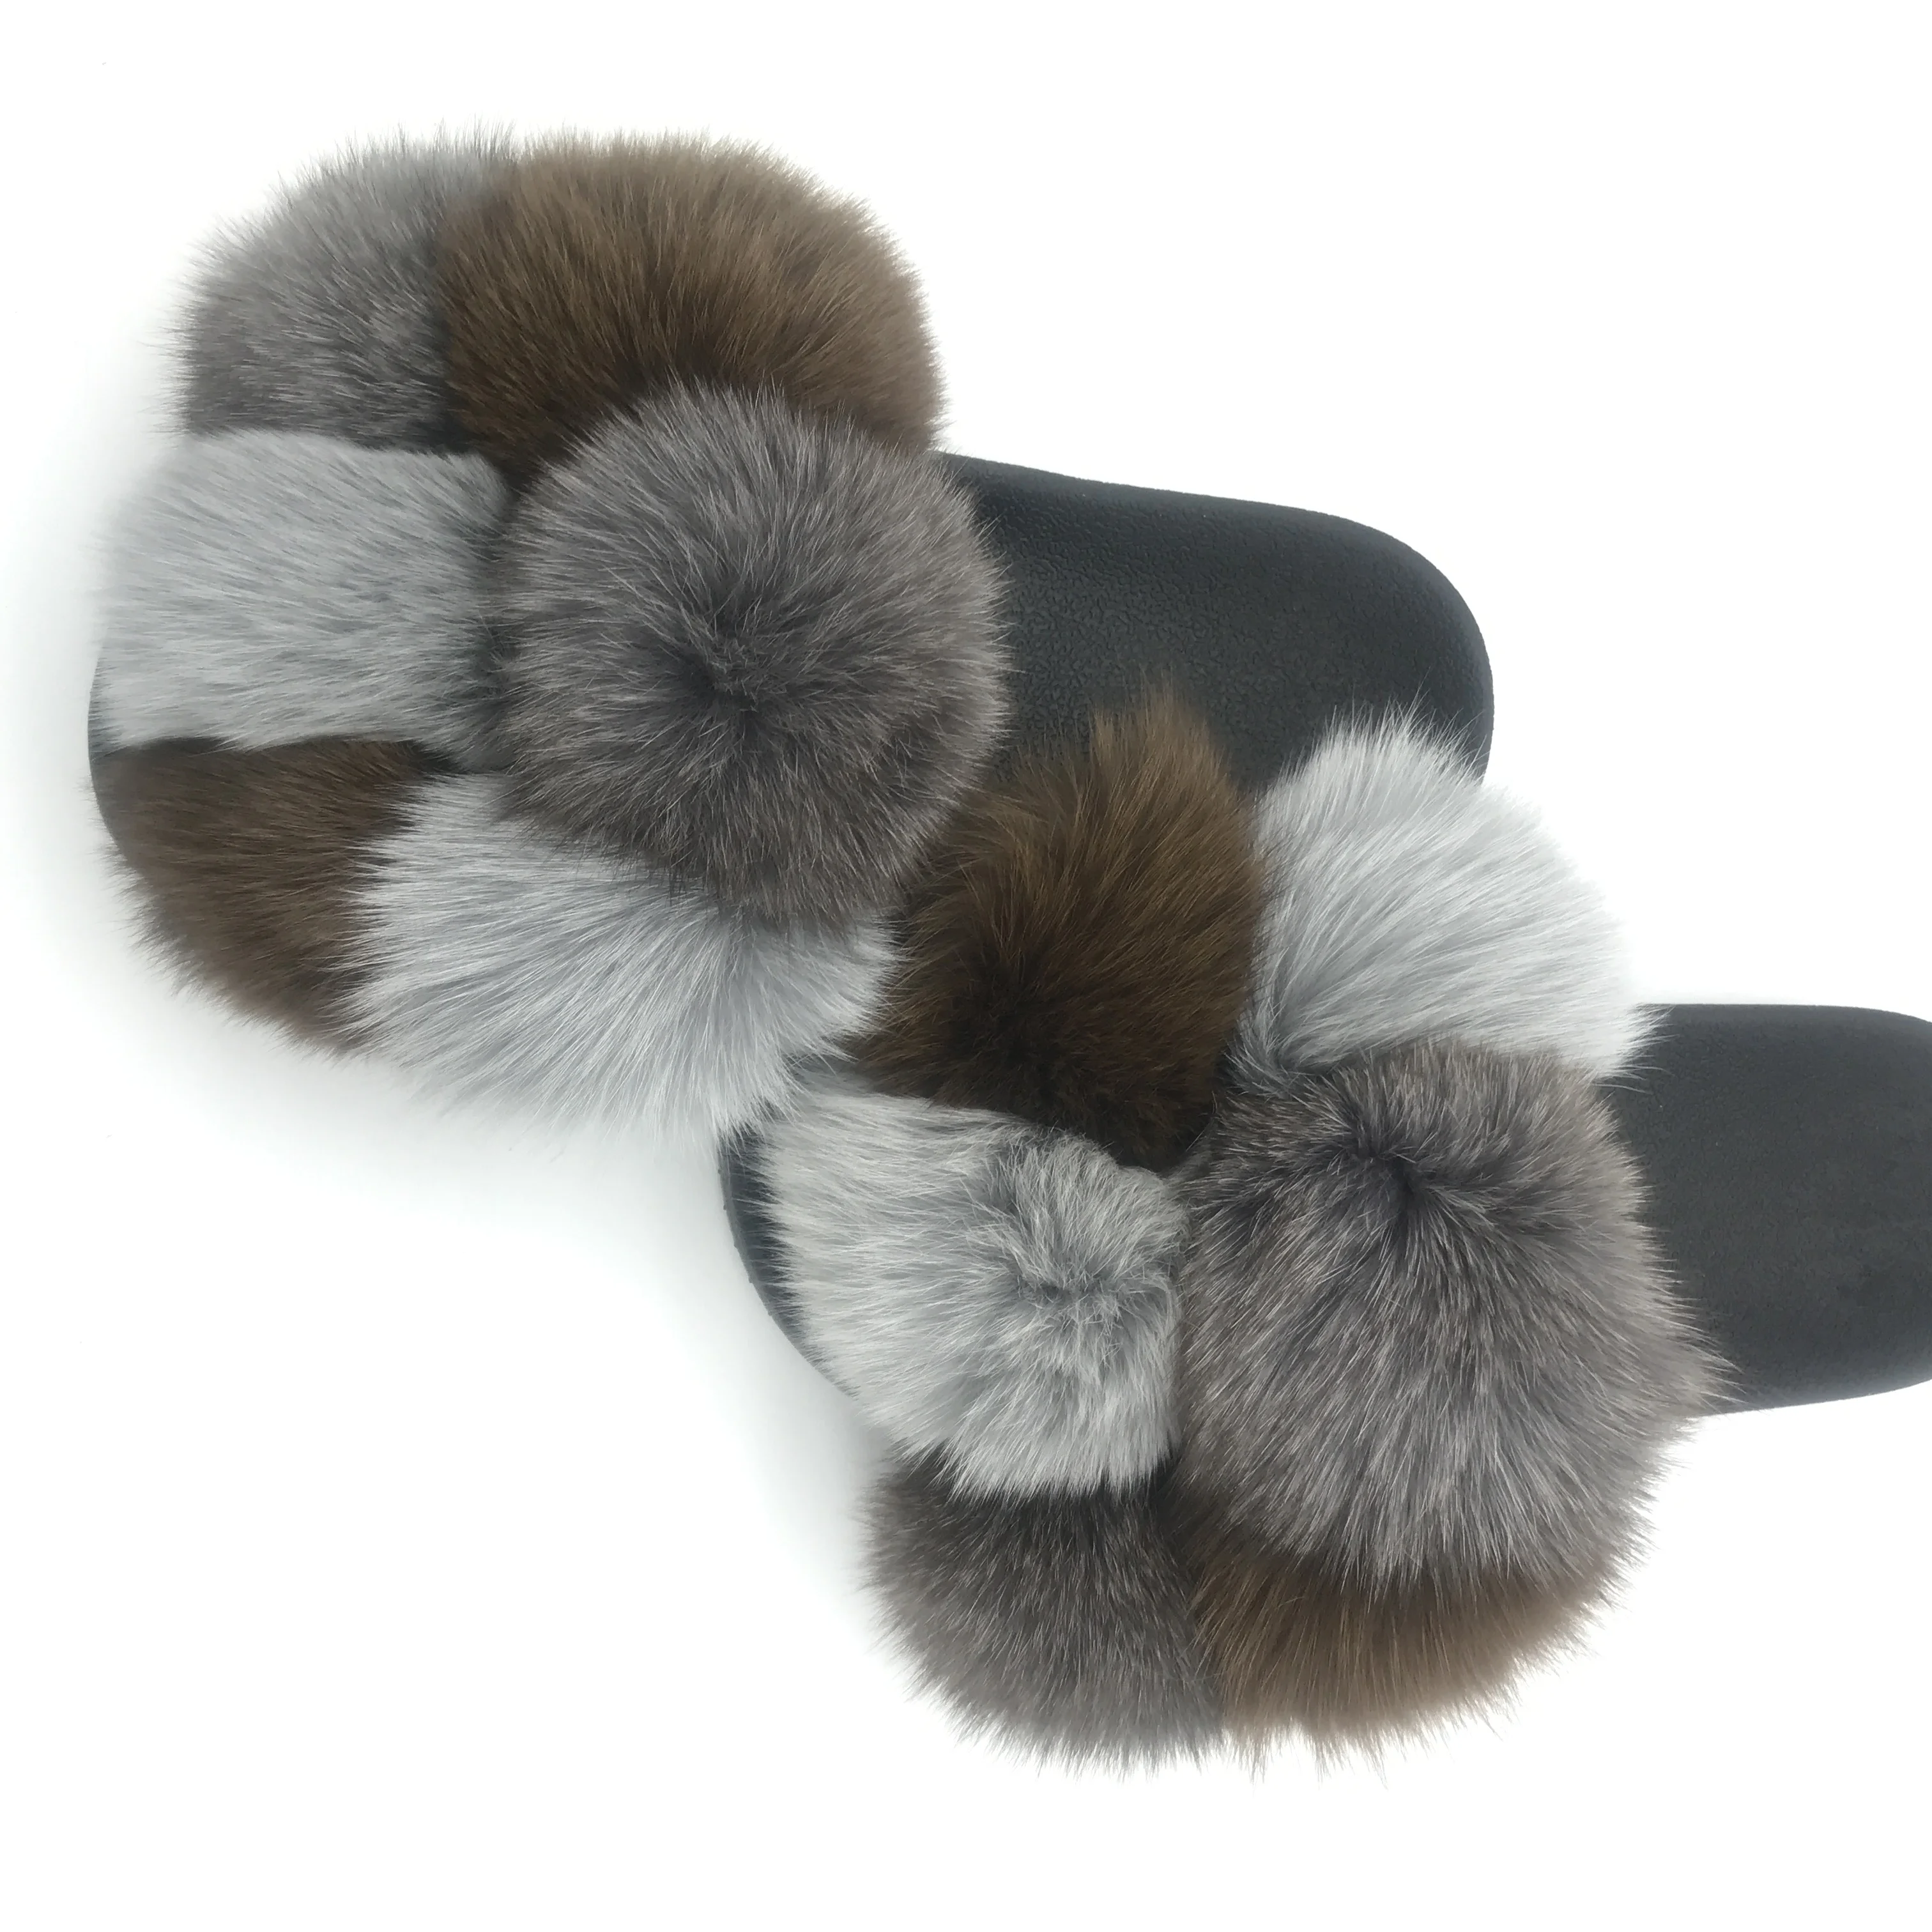 

2021 New Arrival Women Raccoon Fur Women's Slippers PVC Sole Cute Fluffy PomPom Sandals for Women and Ladies